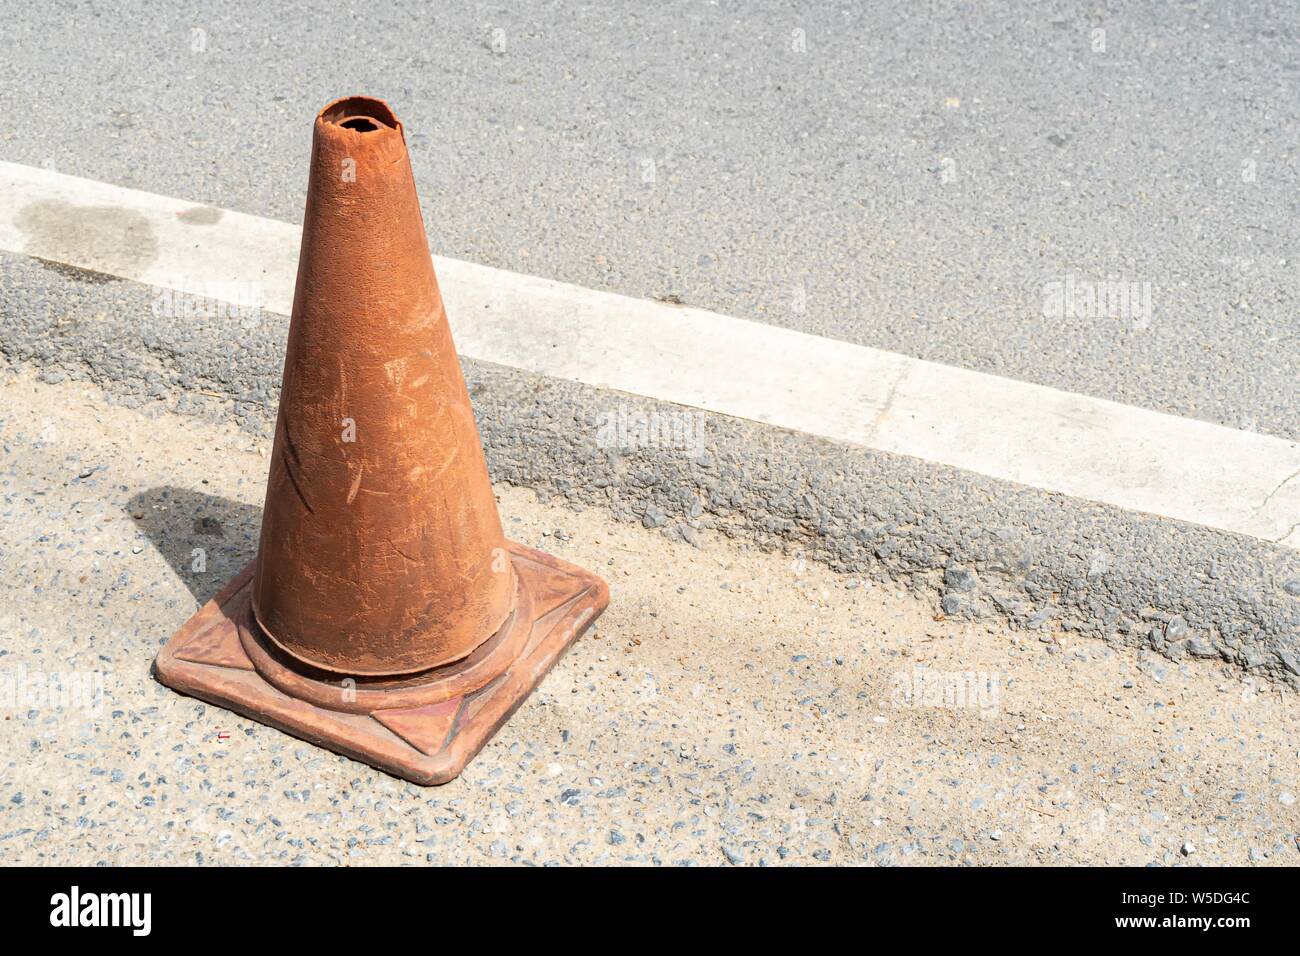 Old Traffic cones, also called pylons, witches' hats, road cones, highway cones, safety cones, channelizing devices, or construction cones Stock Photo